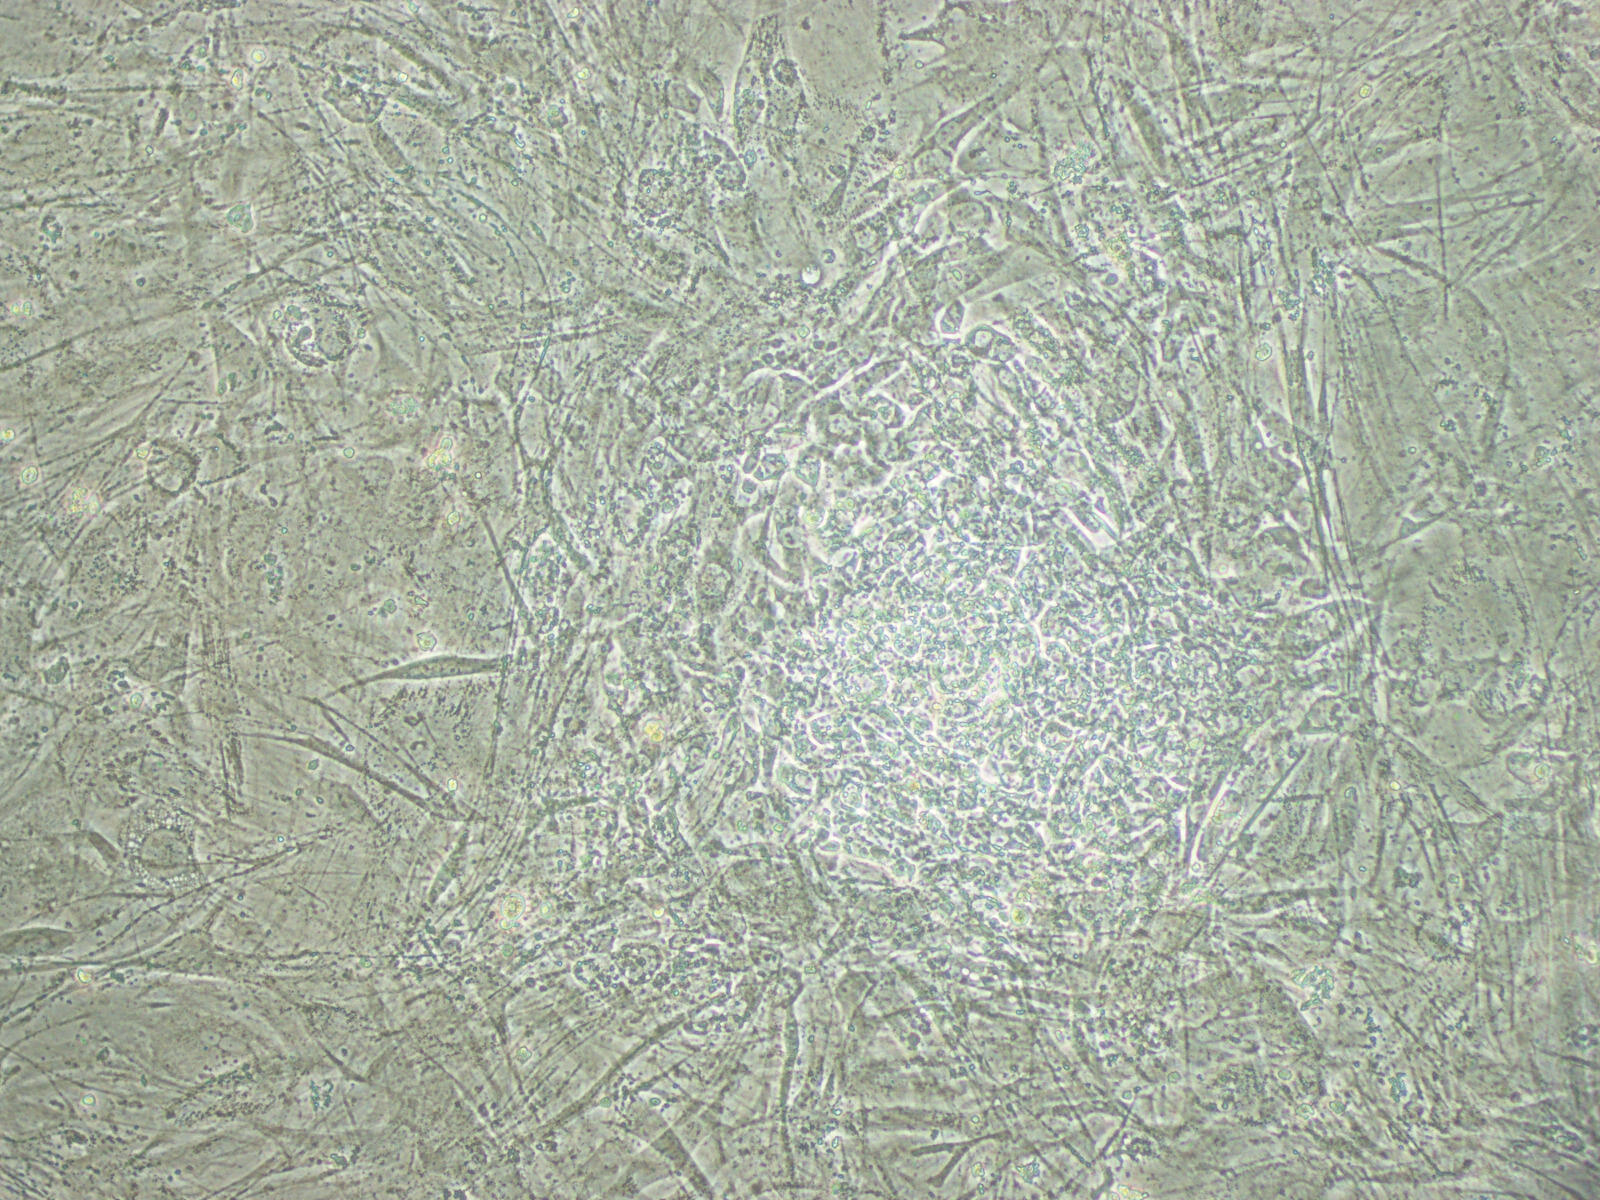 Human embryonic stem cell colonies.